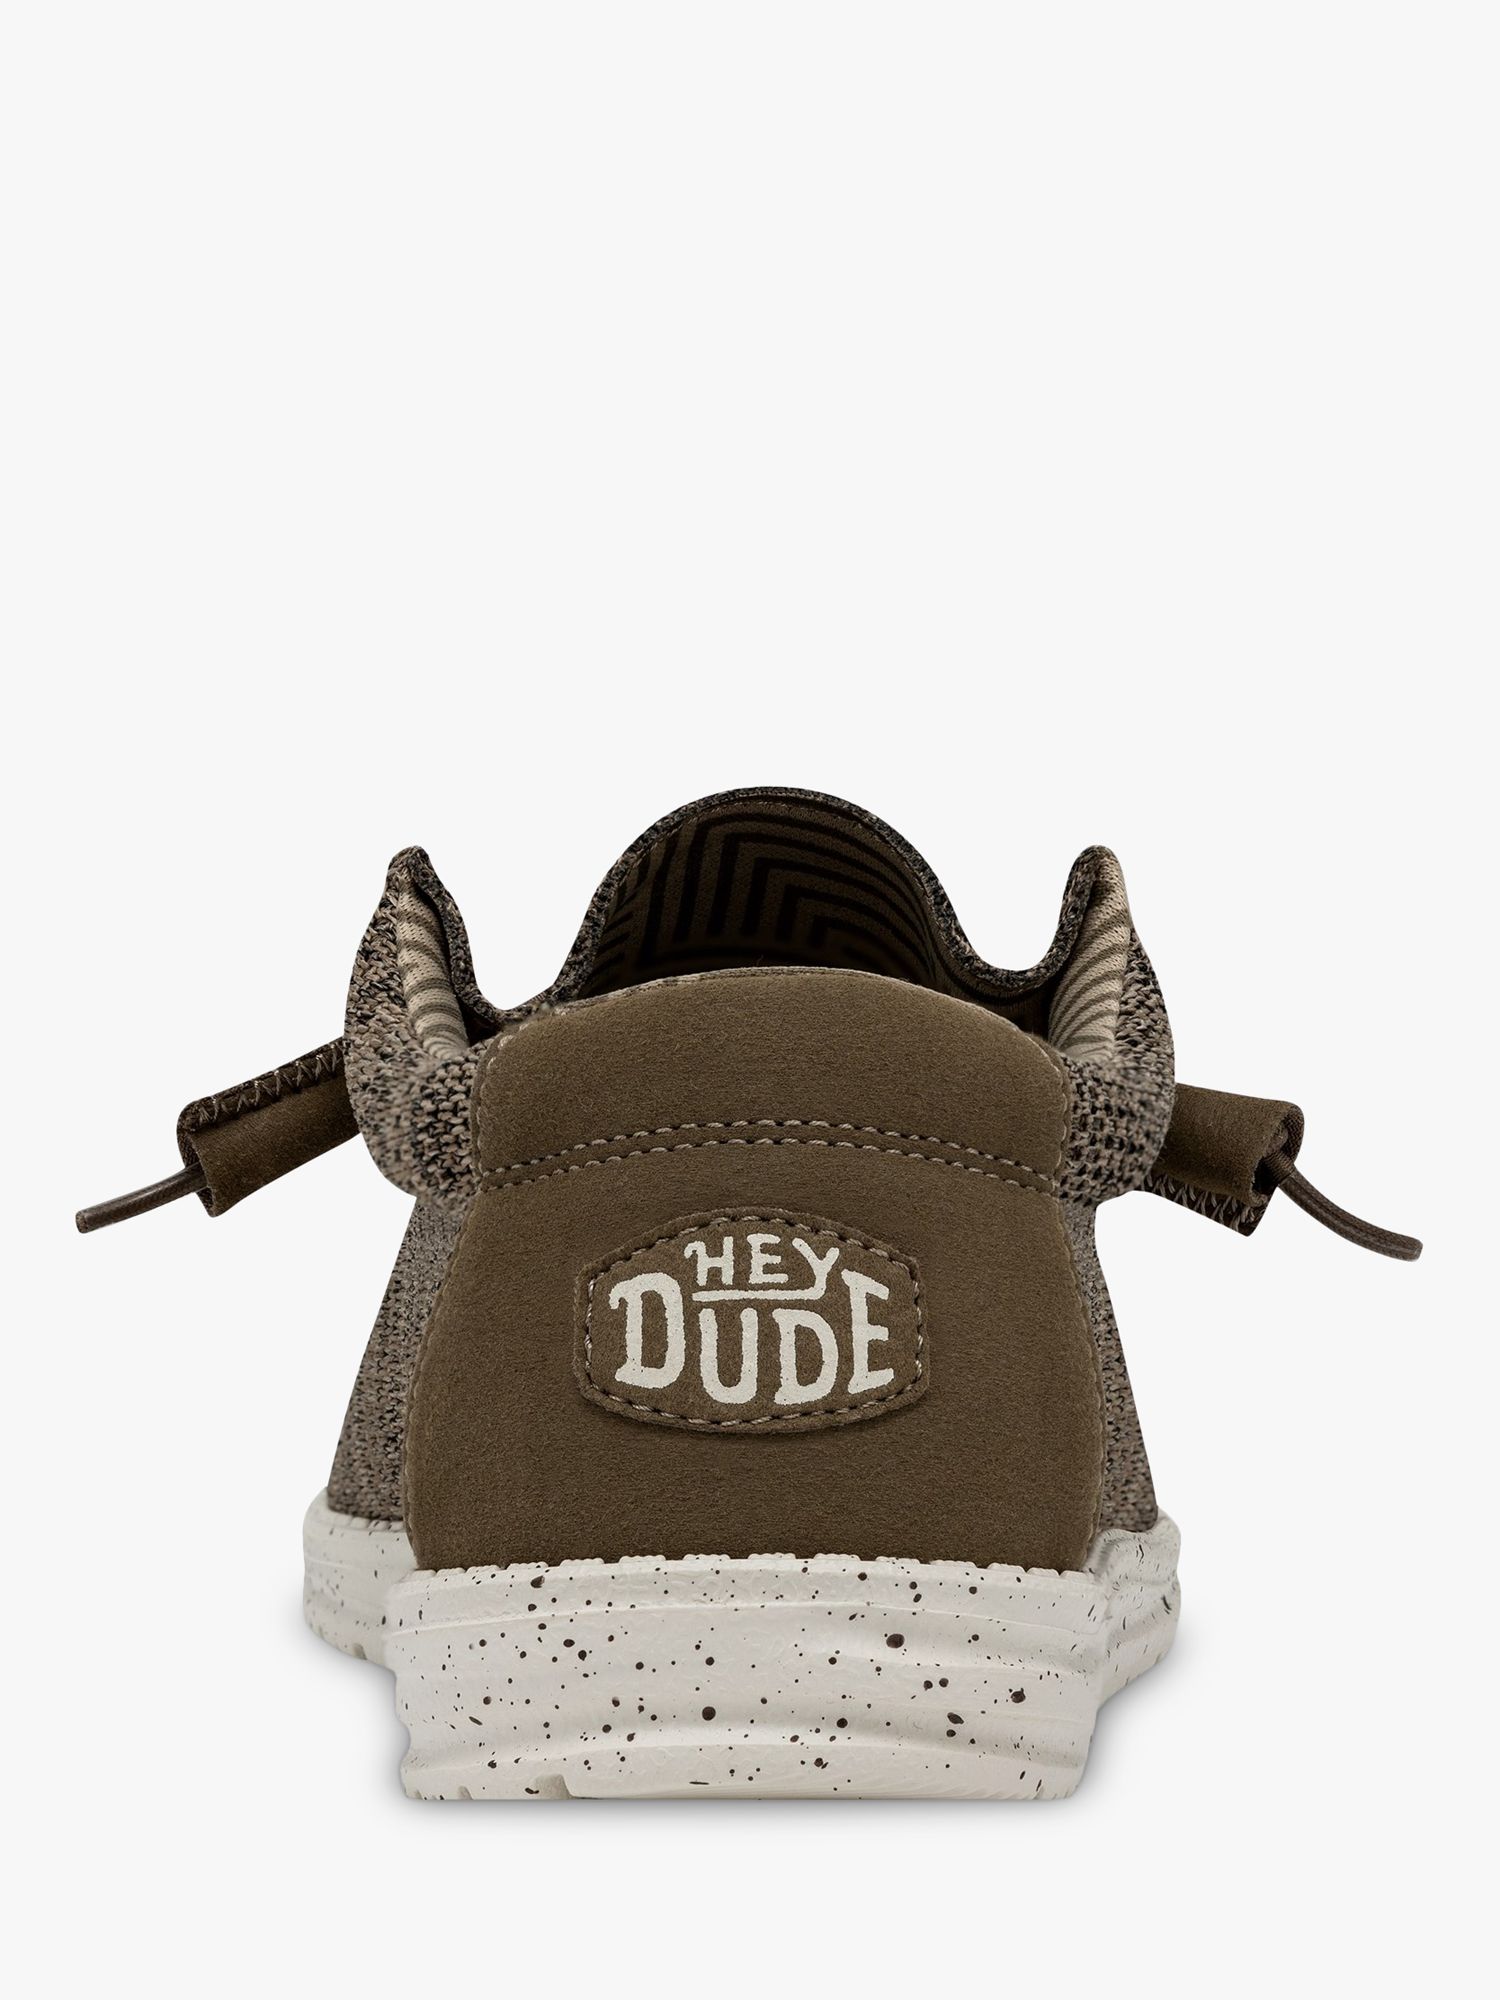 Hey Dude Wally Sox Shoes, Brown, 7